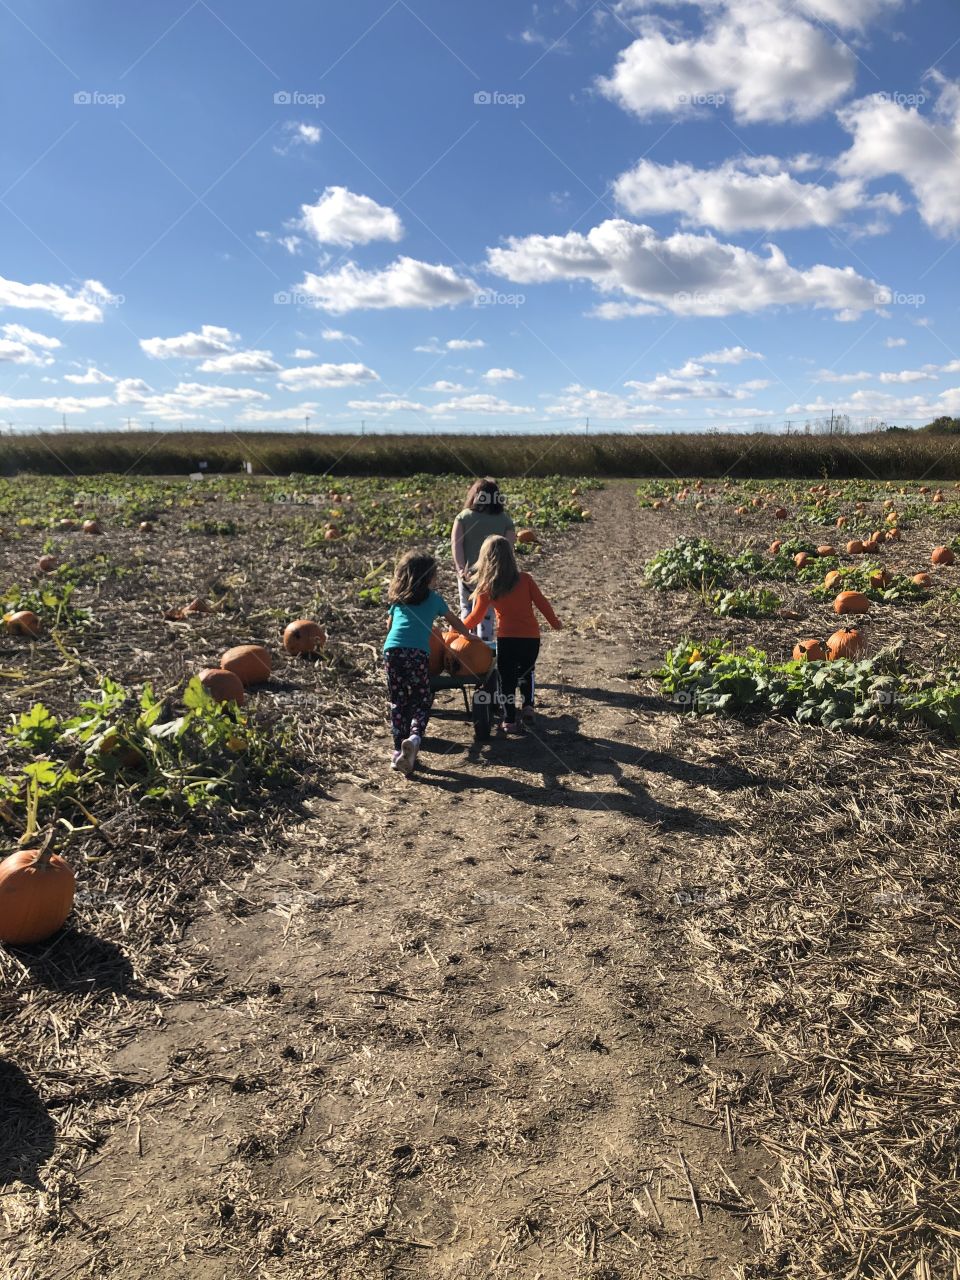 Picking at the pumpkin patch